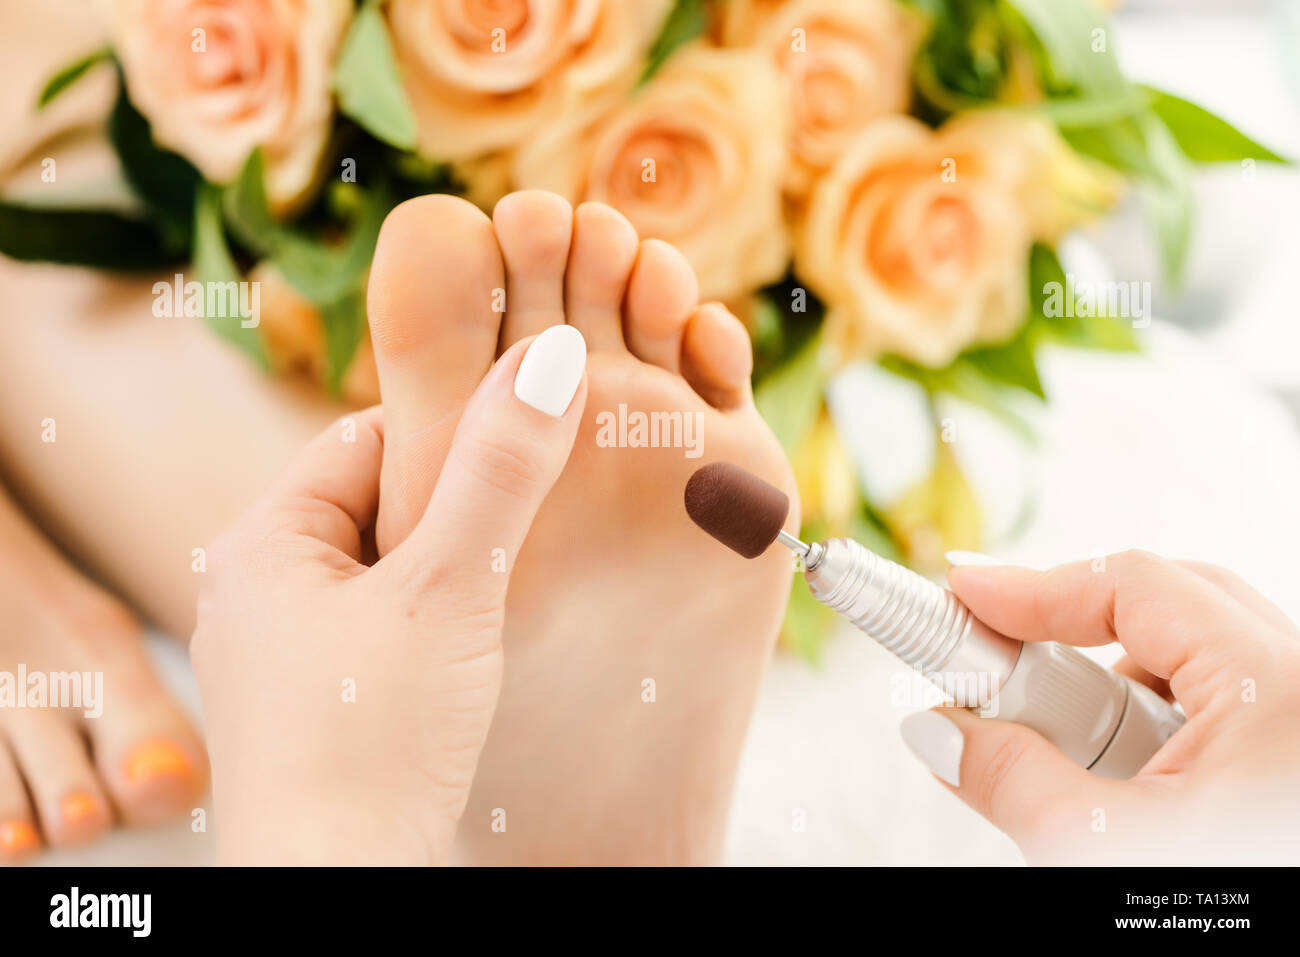 Podiatrist in podiatry session working of feet of client Stock Photo